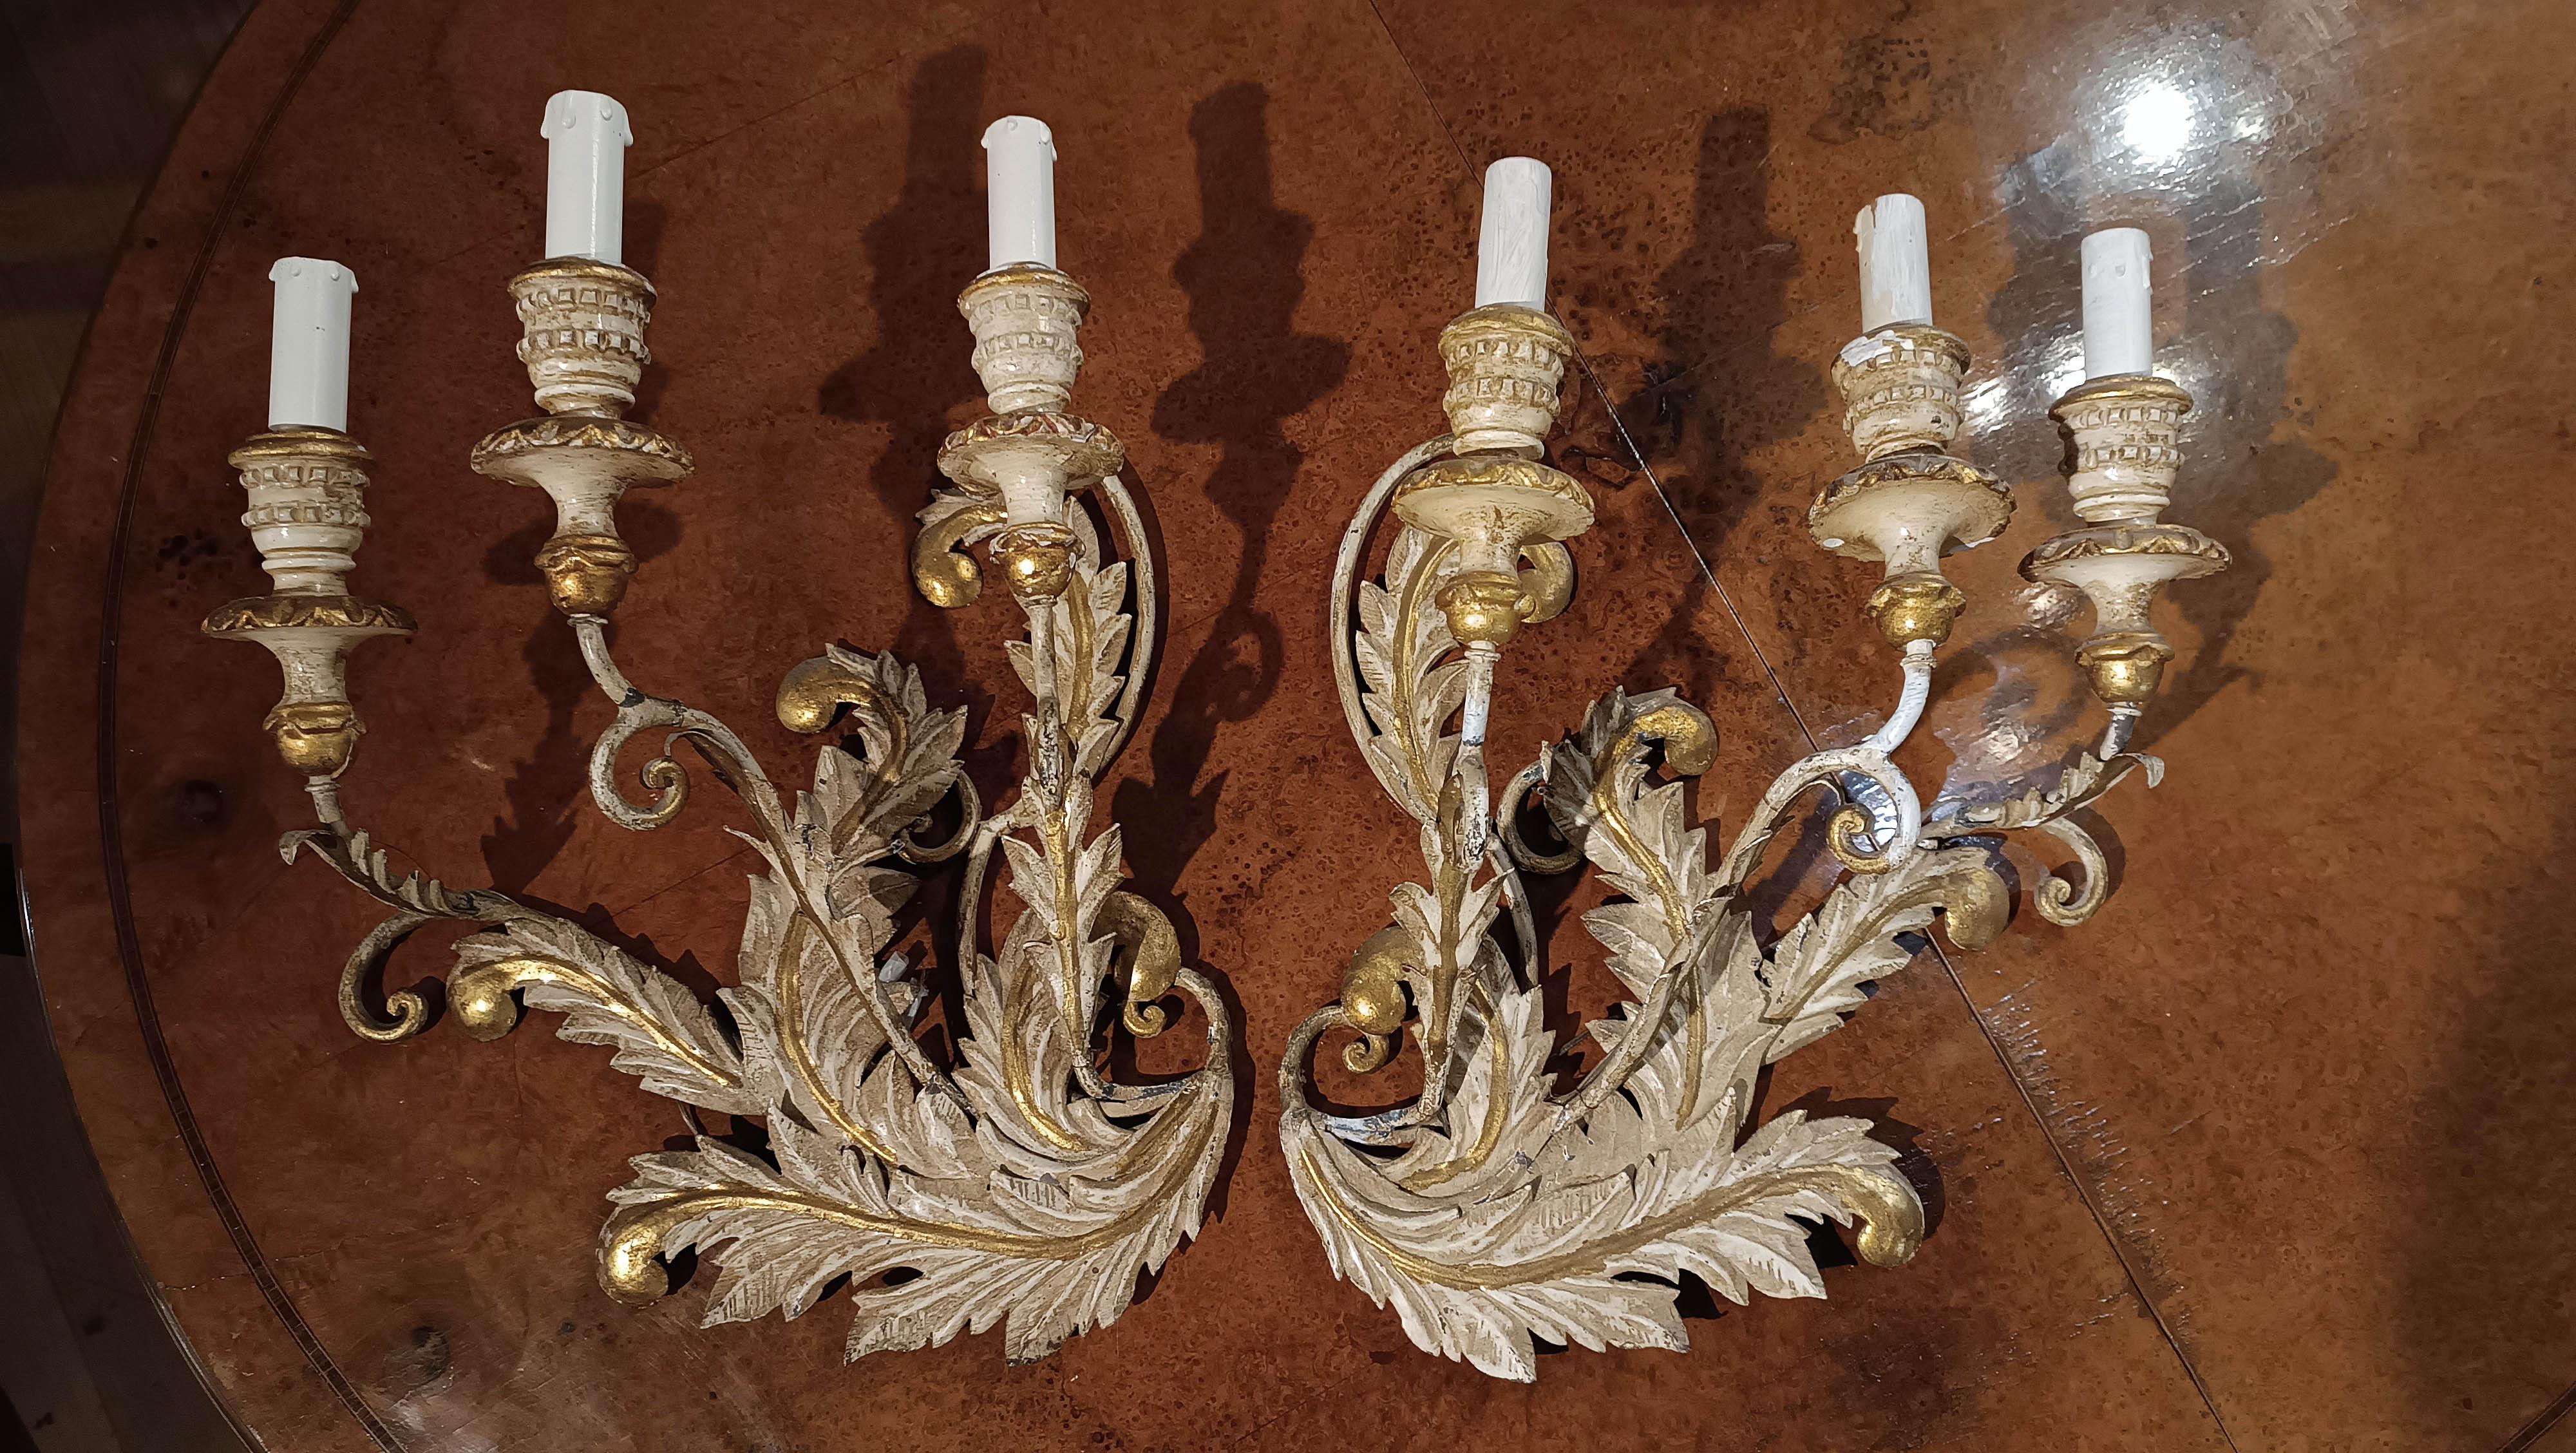 Splendid and refined pair of lacquered and gilded iron wall sconces, each with three lights. The candle holder buds are made of lacquered and gilded painted wood, finely turned to add a touch of elegance. The bodies and arms of the sconces are